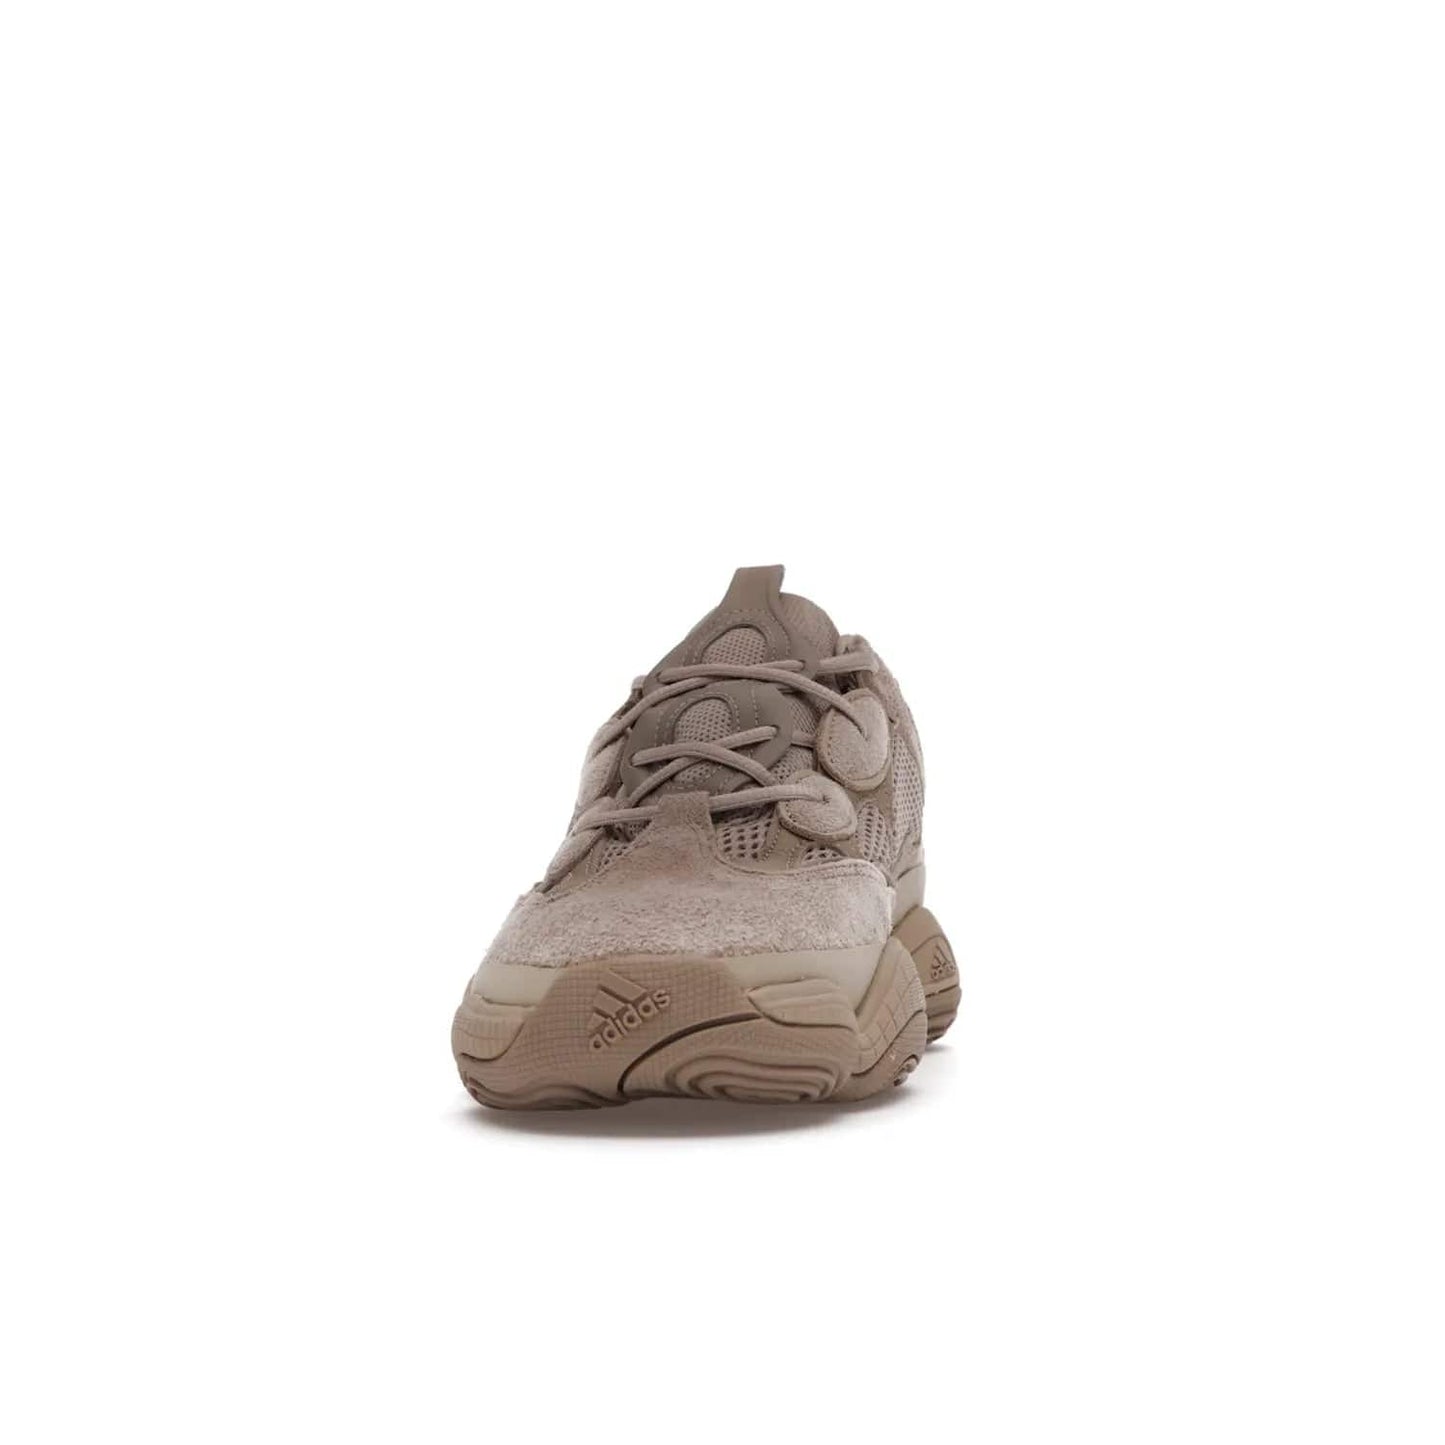 adidas Yeezy 500 Taupe Light - Image 11 - Only at www.BallersClubKickz.com - The adidas Yeezy 500 Taupe Light combines mesh, leather, and suede, with a durable adiPRENE sole for an eye-catching accessory. Reflective piping adds the perfect finishing touches to this unique silhouette. Ideal for any wardrobe, releasing in June 2021.